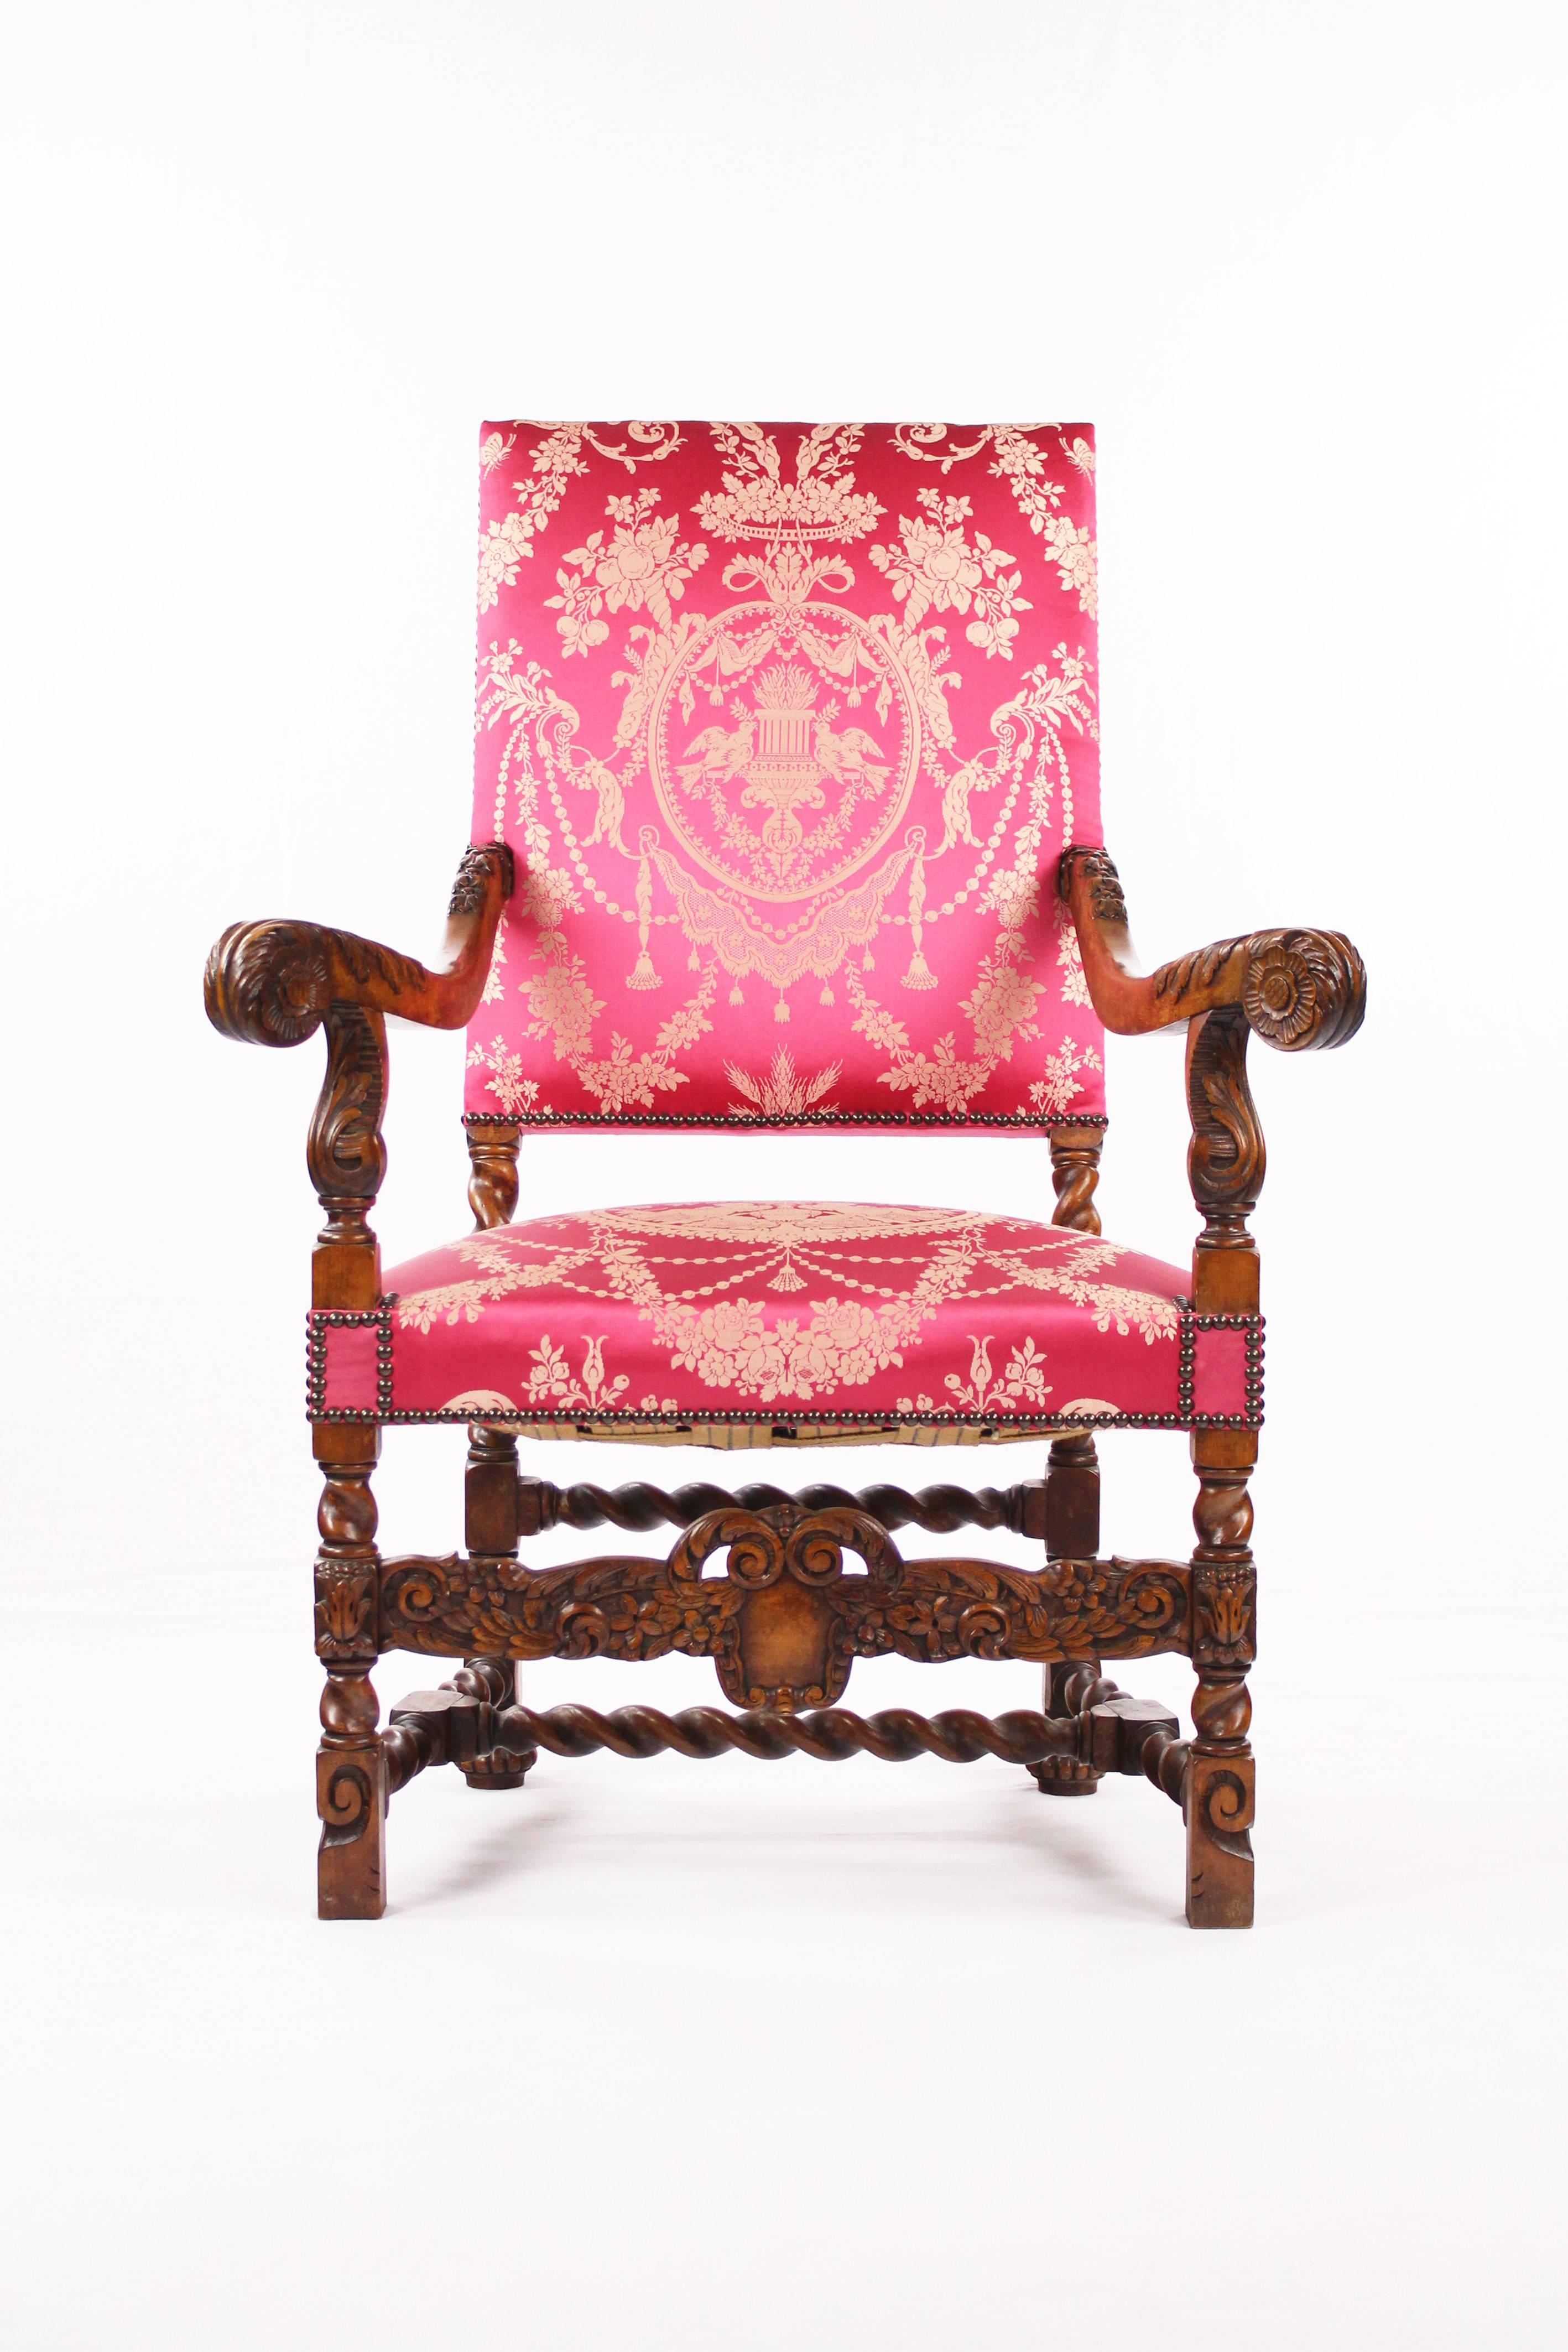 Late 19th Century Pair of Chairs, Beech Massively, circa 1880-1890, Carved and Stilted